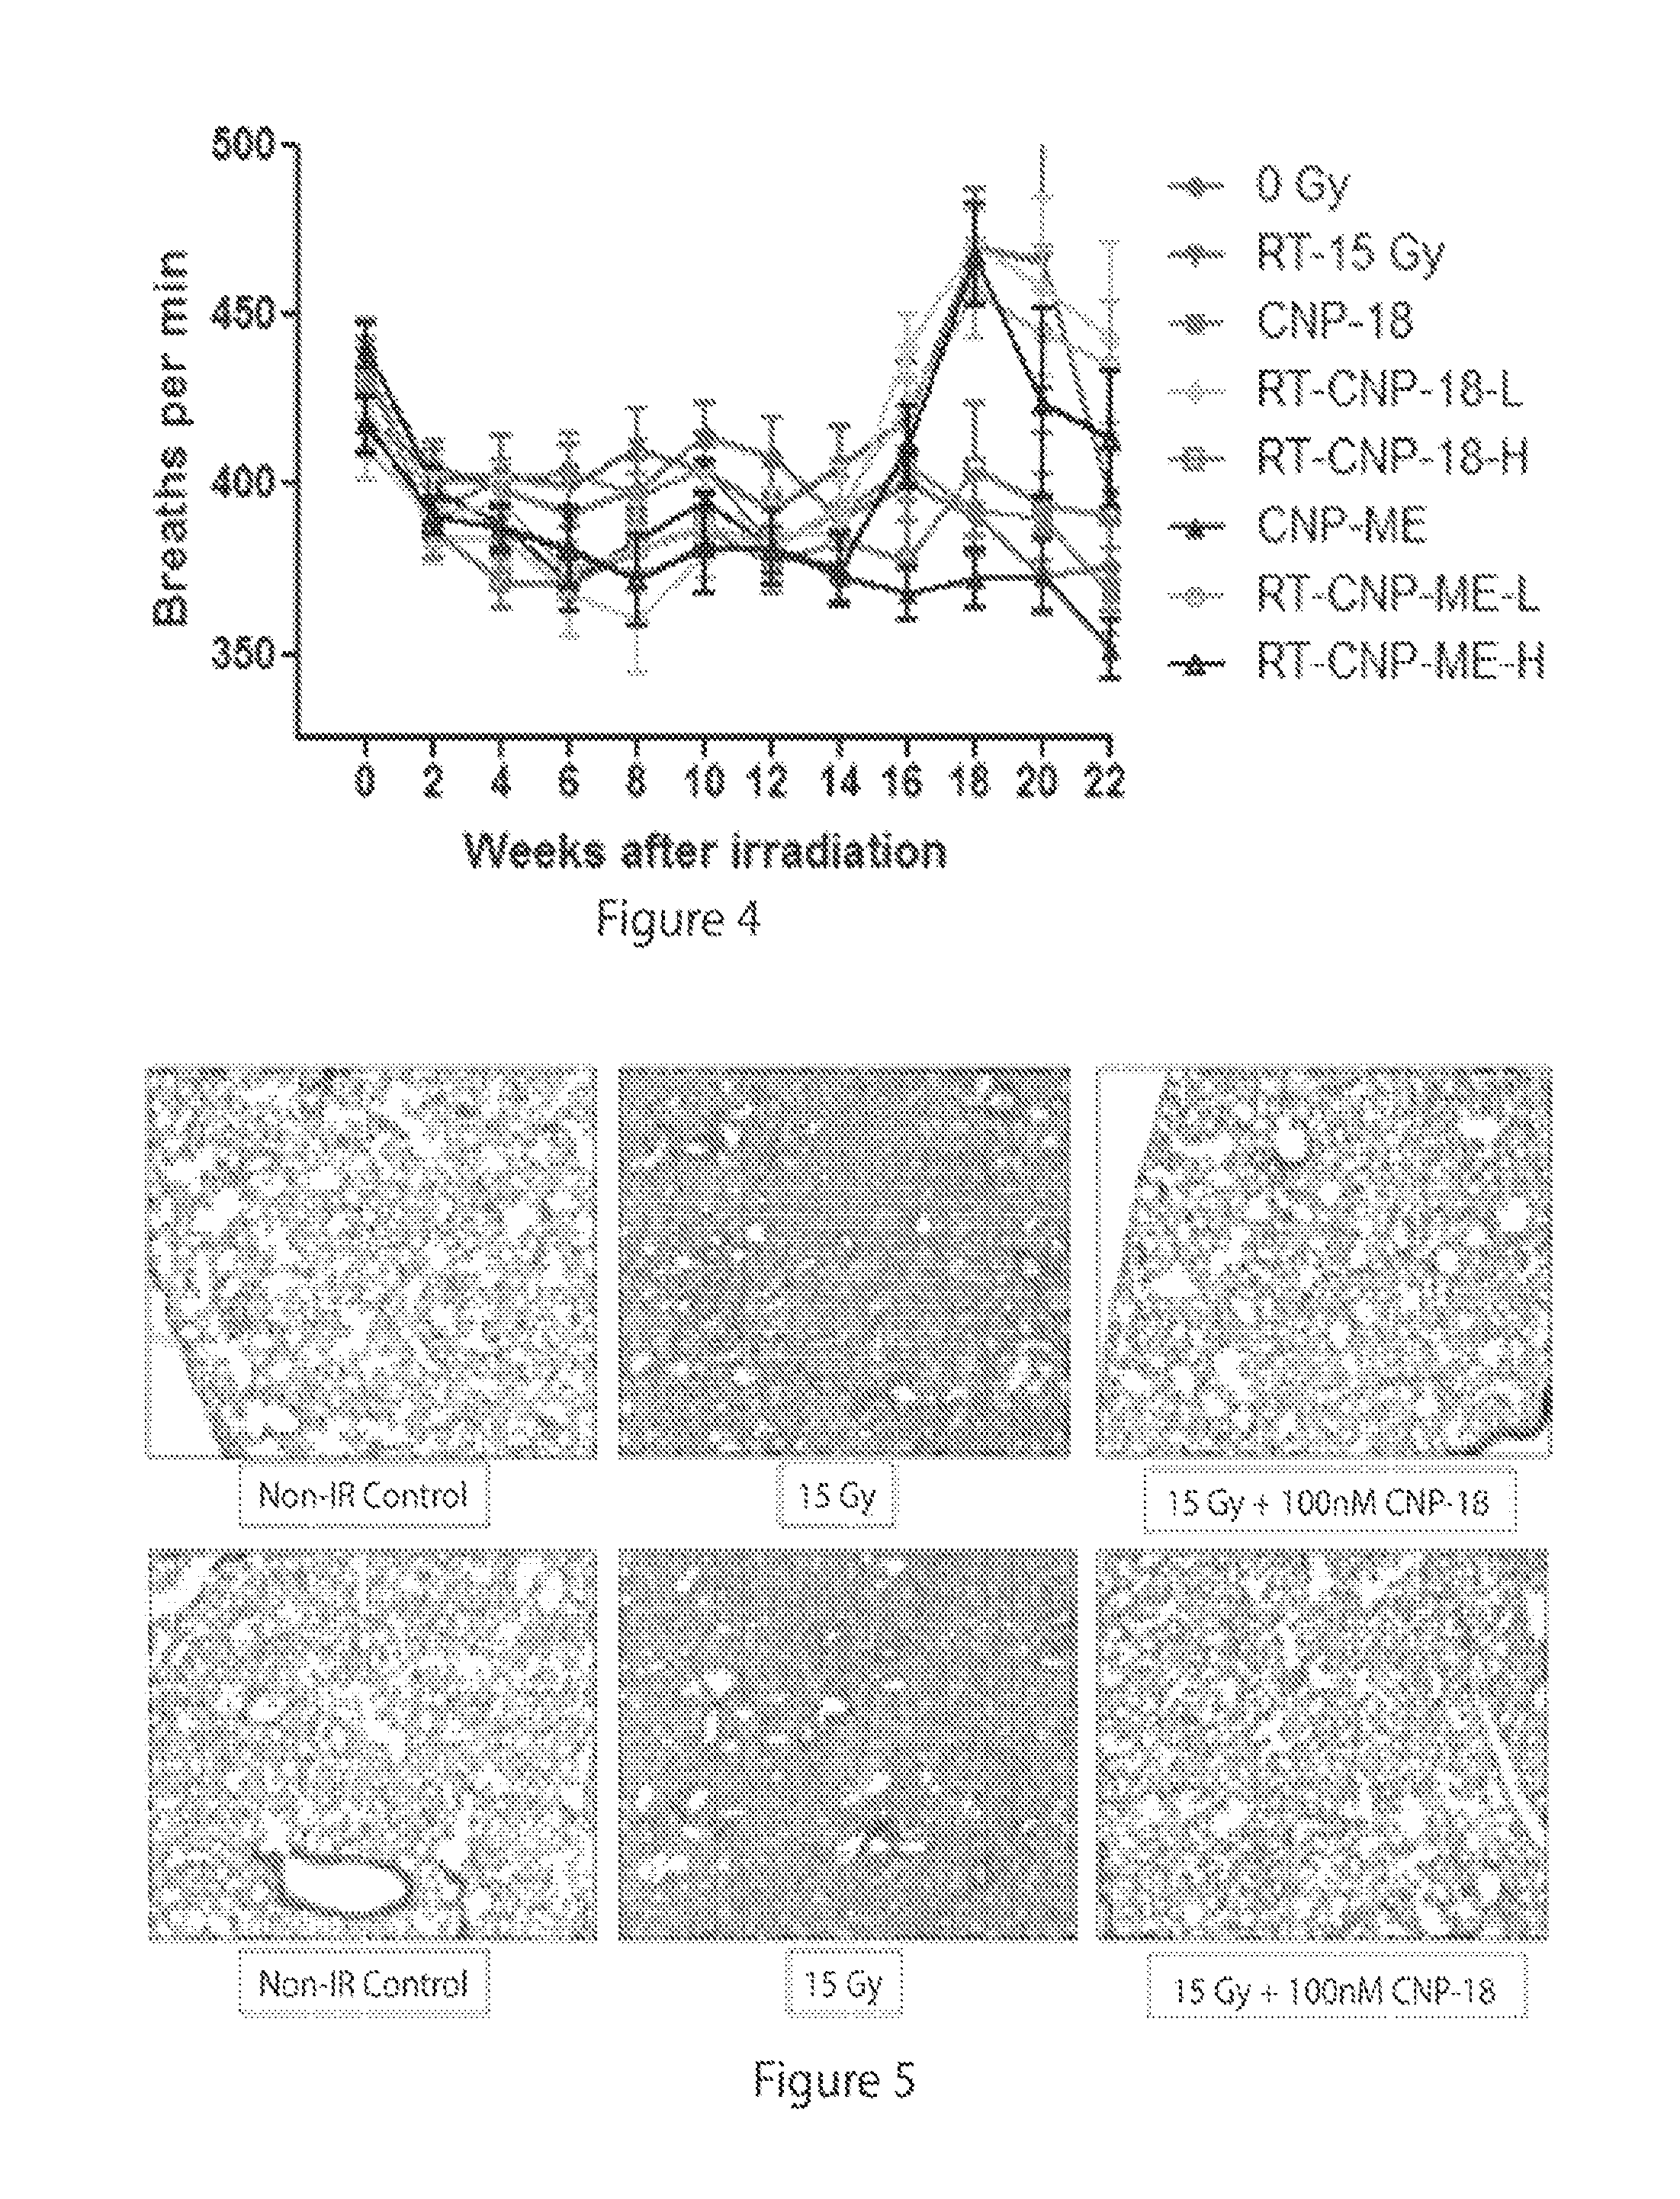 Methods of using cerium oxide nanoparticles to mitigate or protect against radiation injury